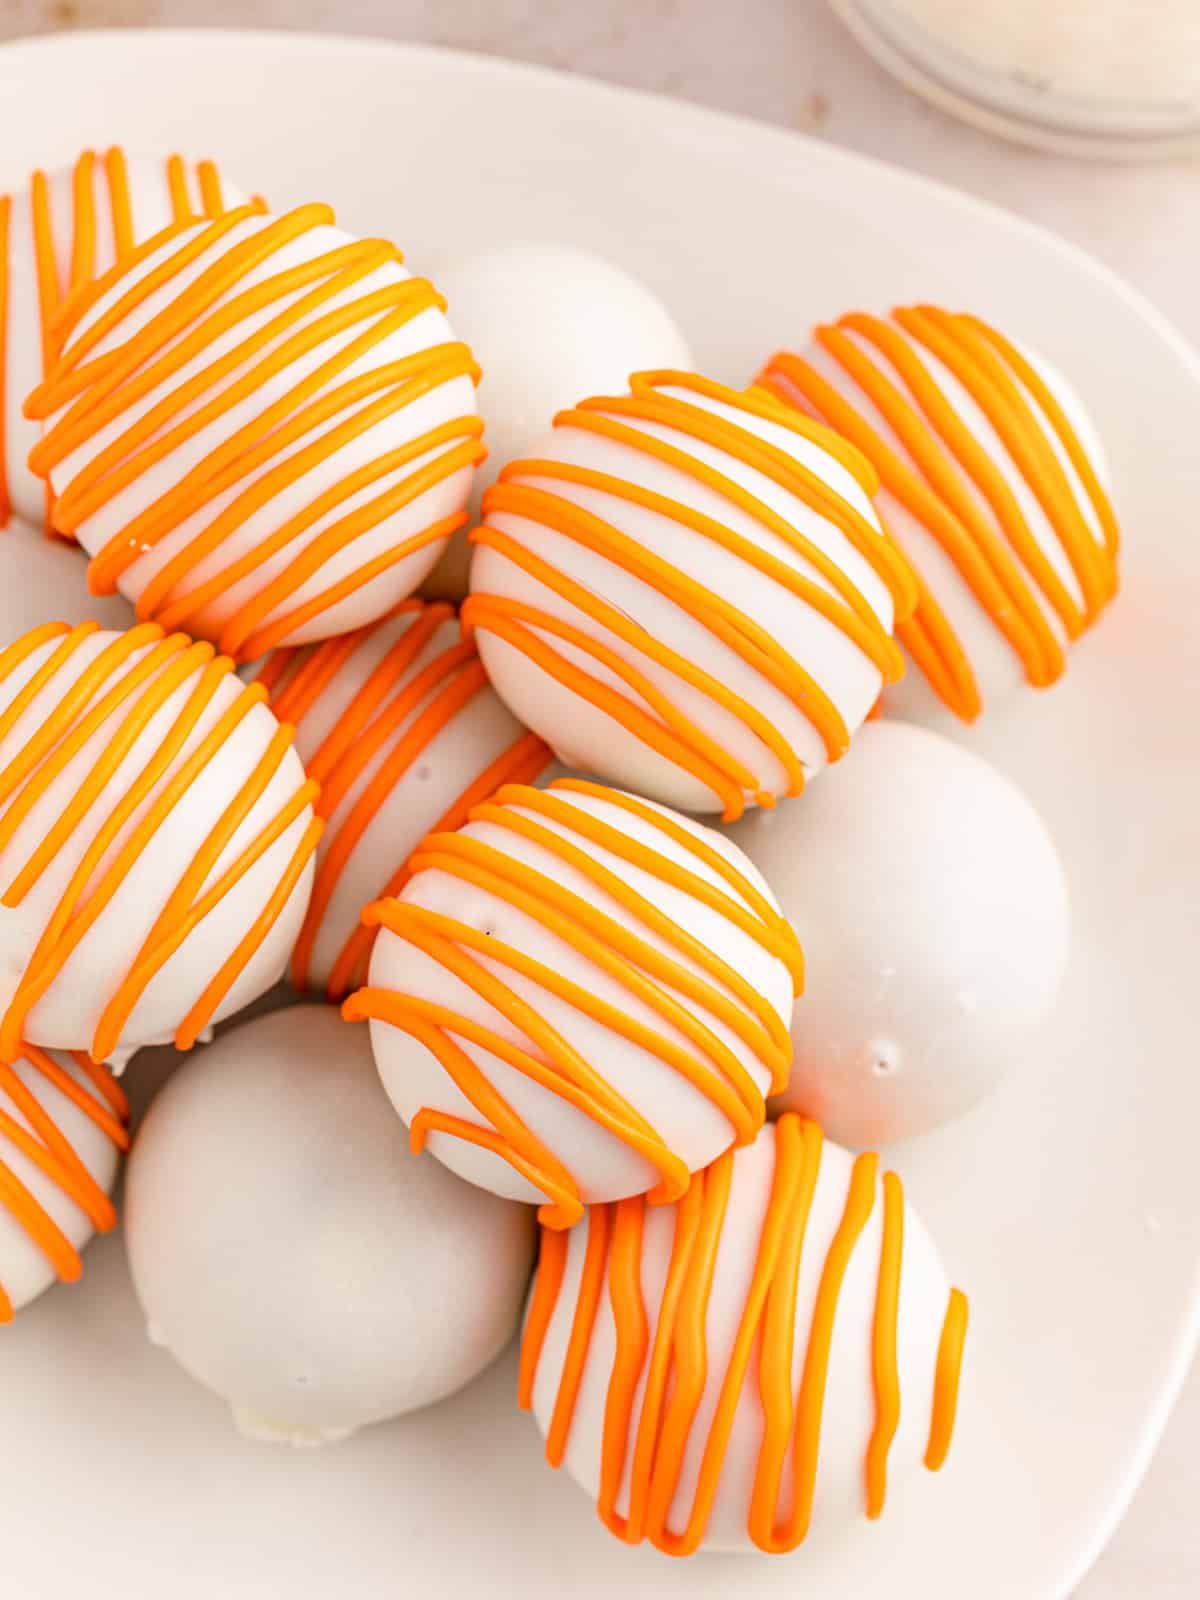 White chocolate dipped carrot cake balls with orange chocolate drizzle on a plate.